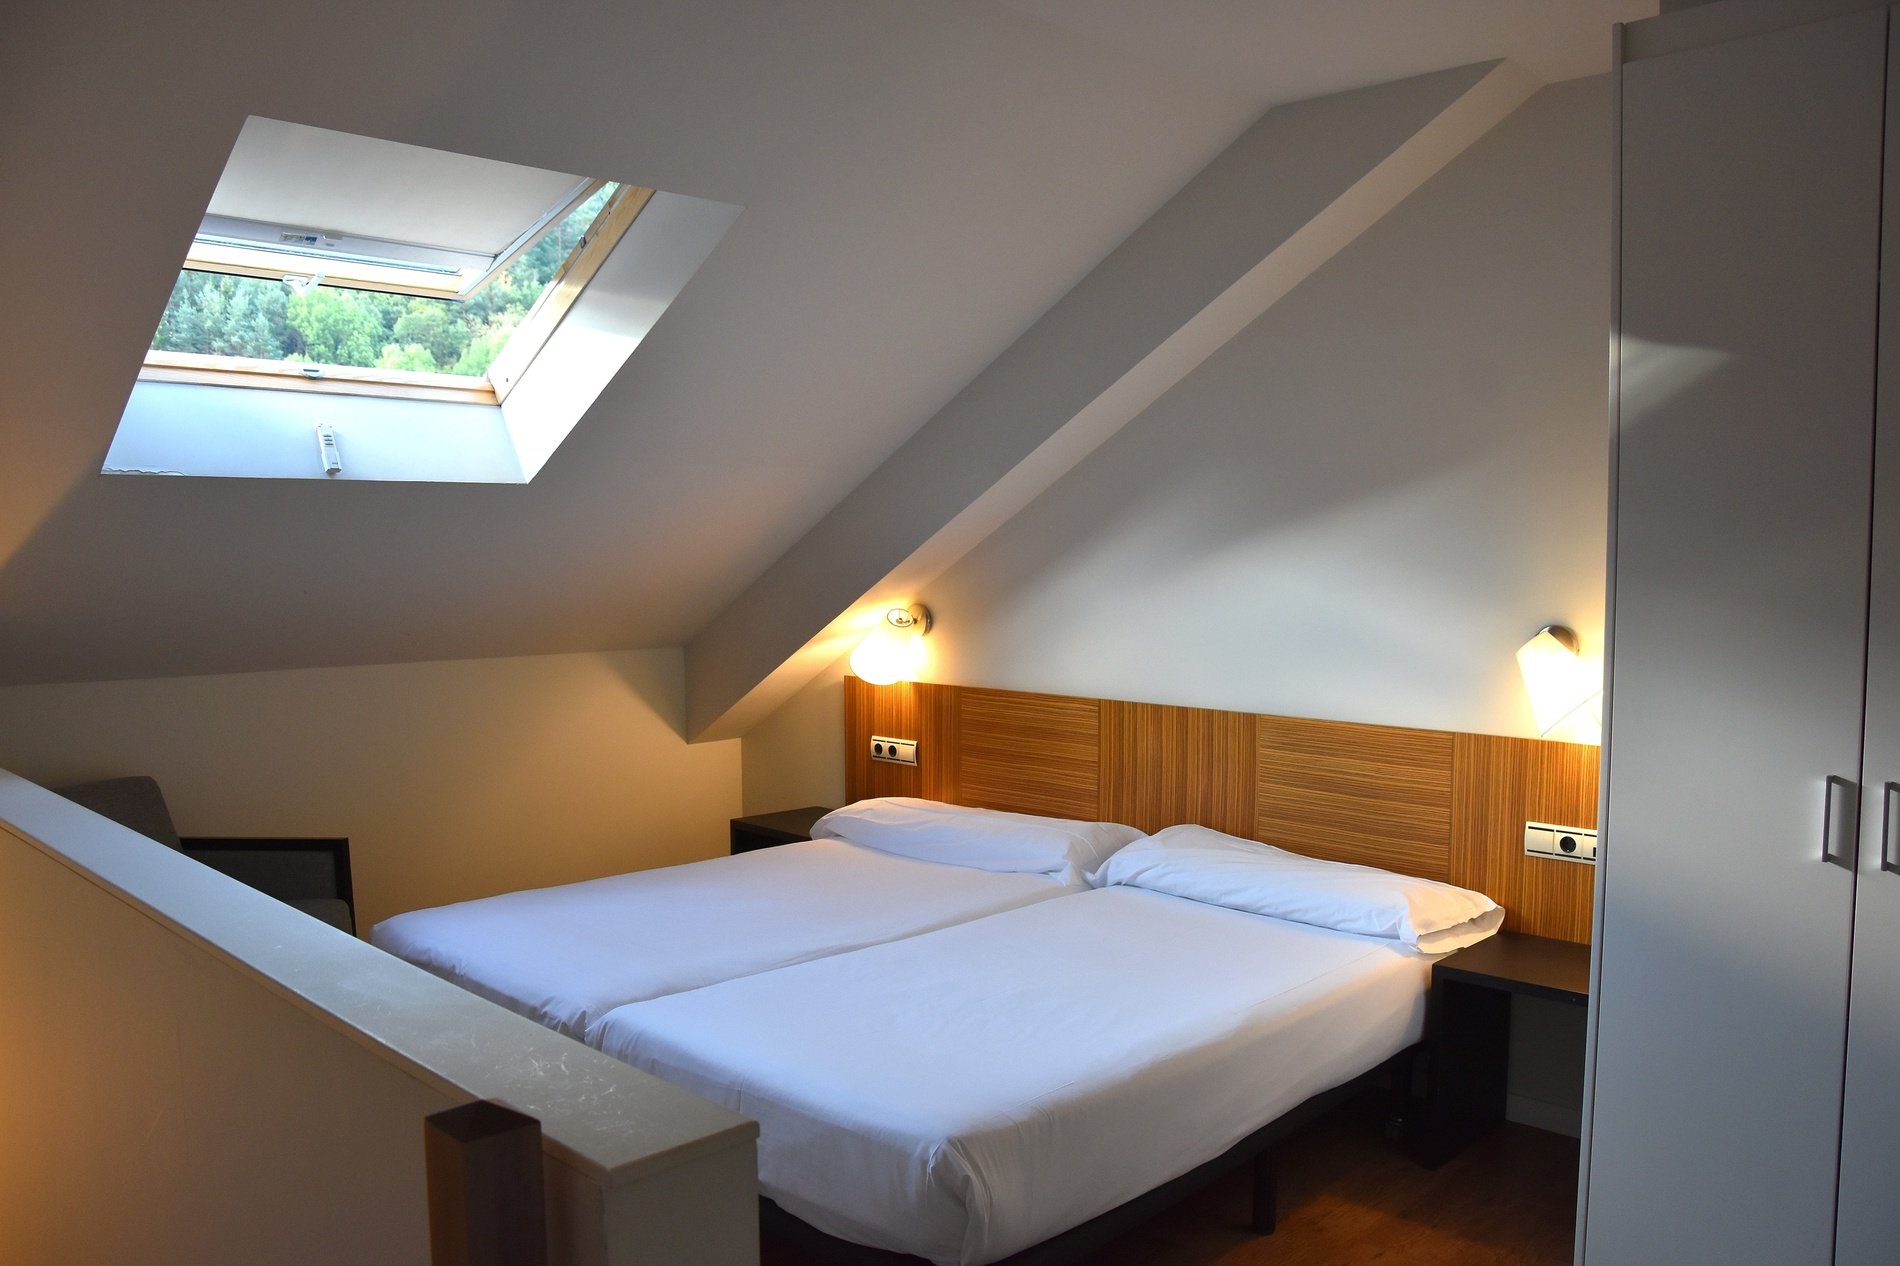 a bedroom with two beds and a skylight in the ceiling